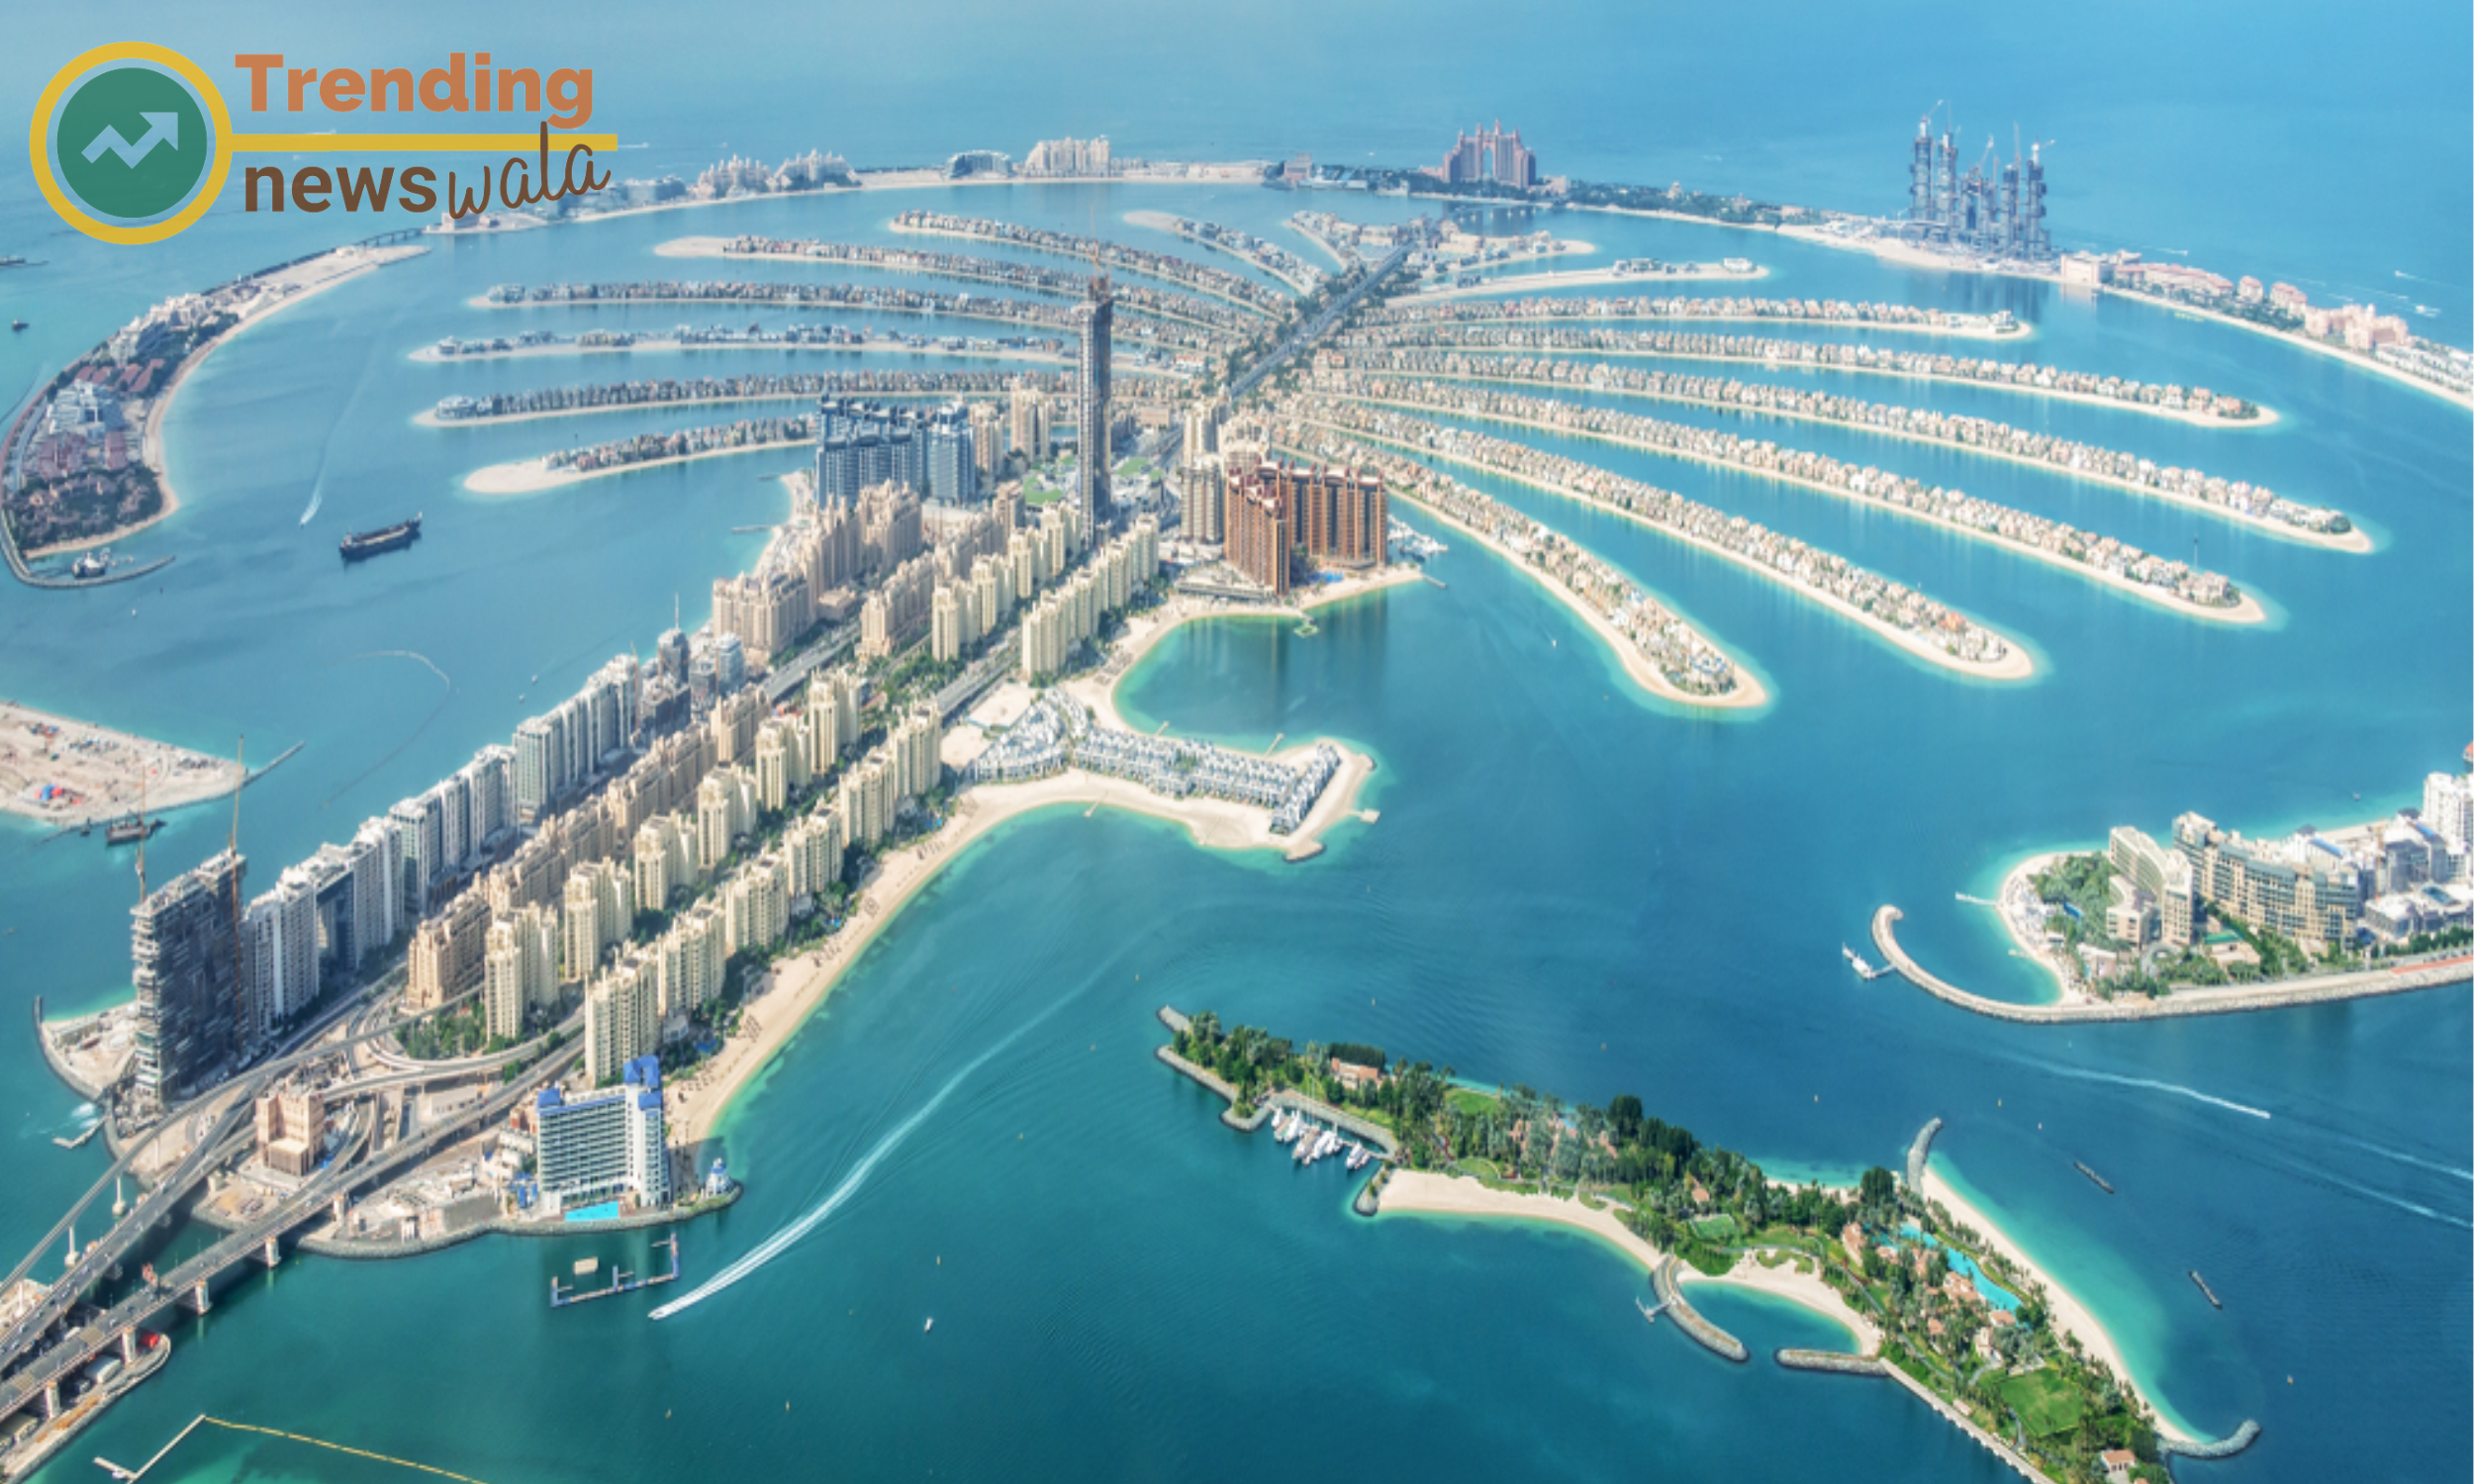 Explore the man-made wonder that is Palm Jumeirah